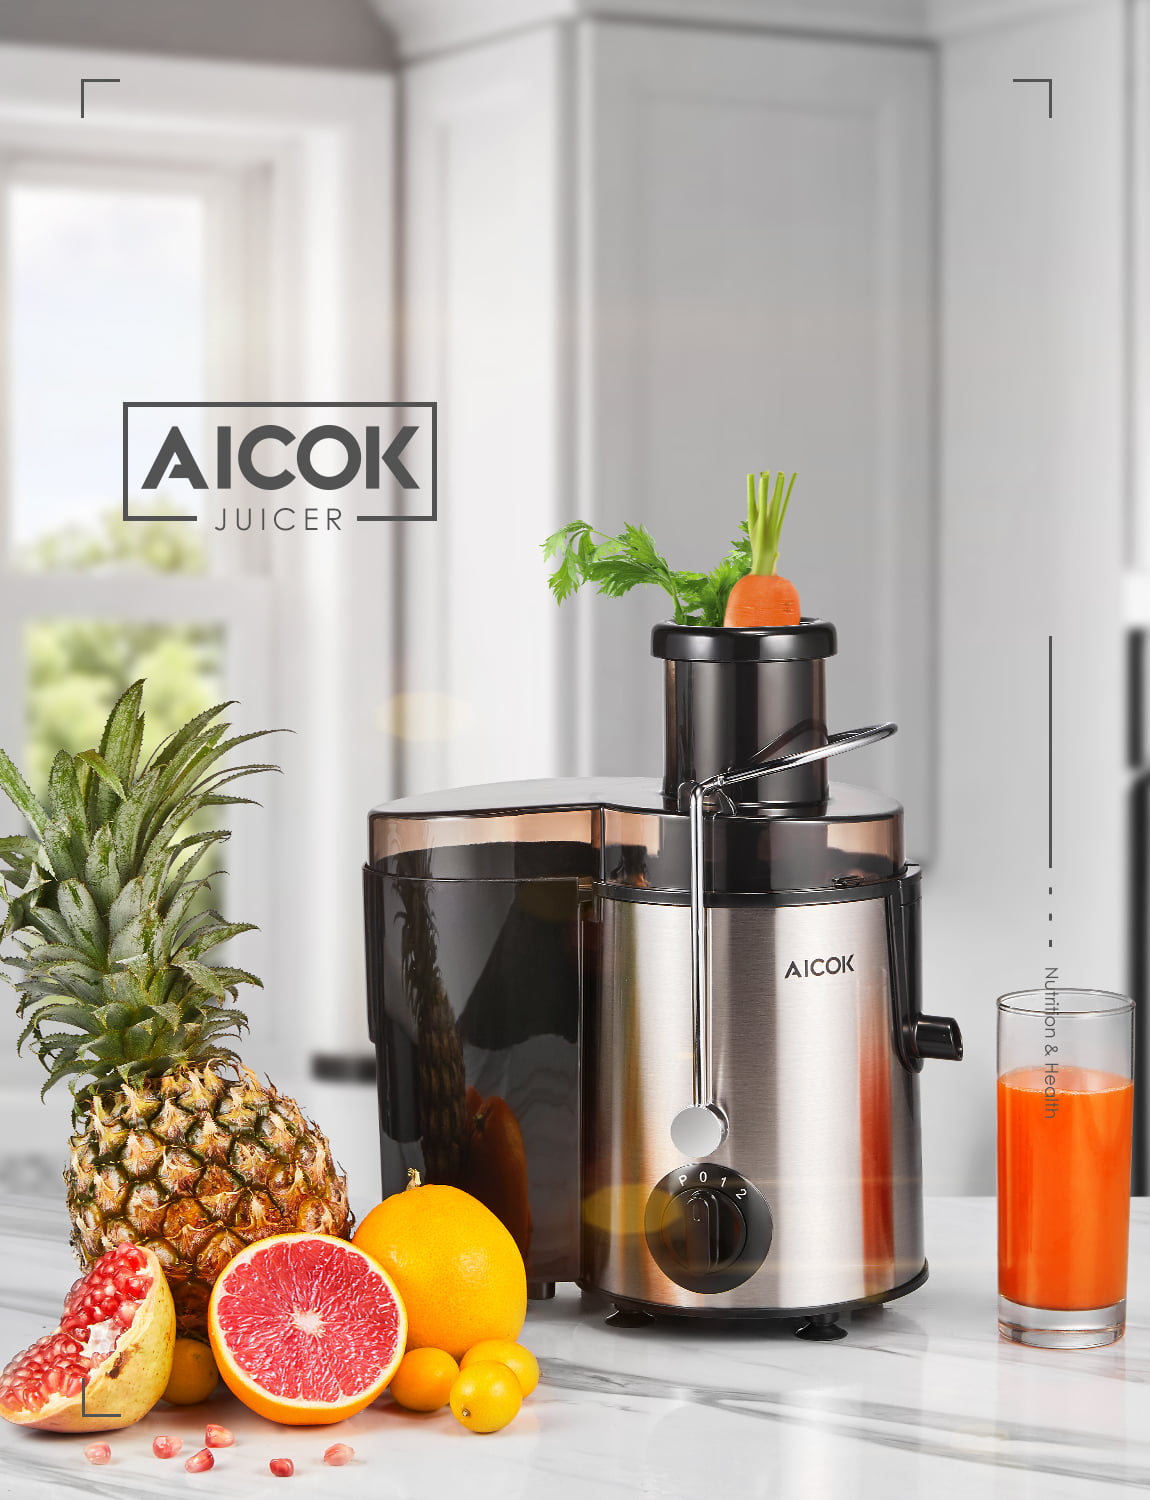 BPA Free Aicok Juicer Juice Extractor Whole Fruit Juicer High Speed for Fruit and Vegetable Dual Speed Setting Centrifugal Fruit Machine Powerful 400 Watt with Juice Jug and Cleaning Brush 